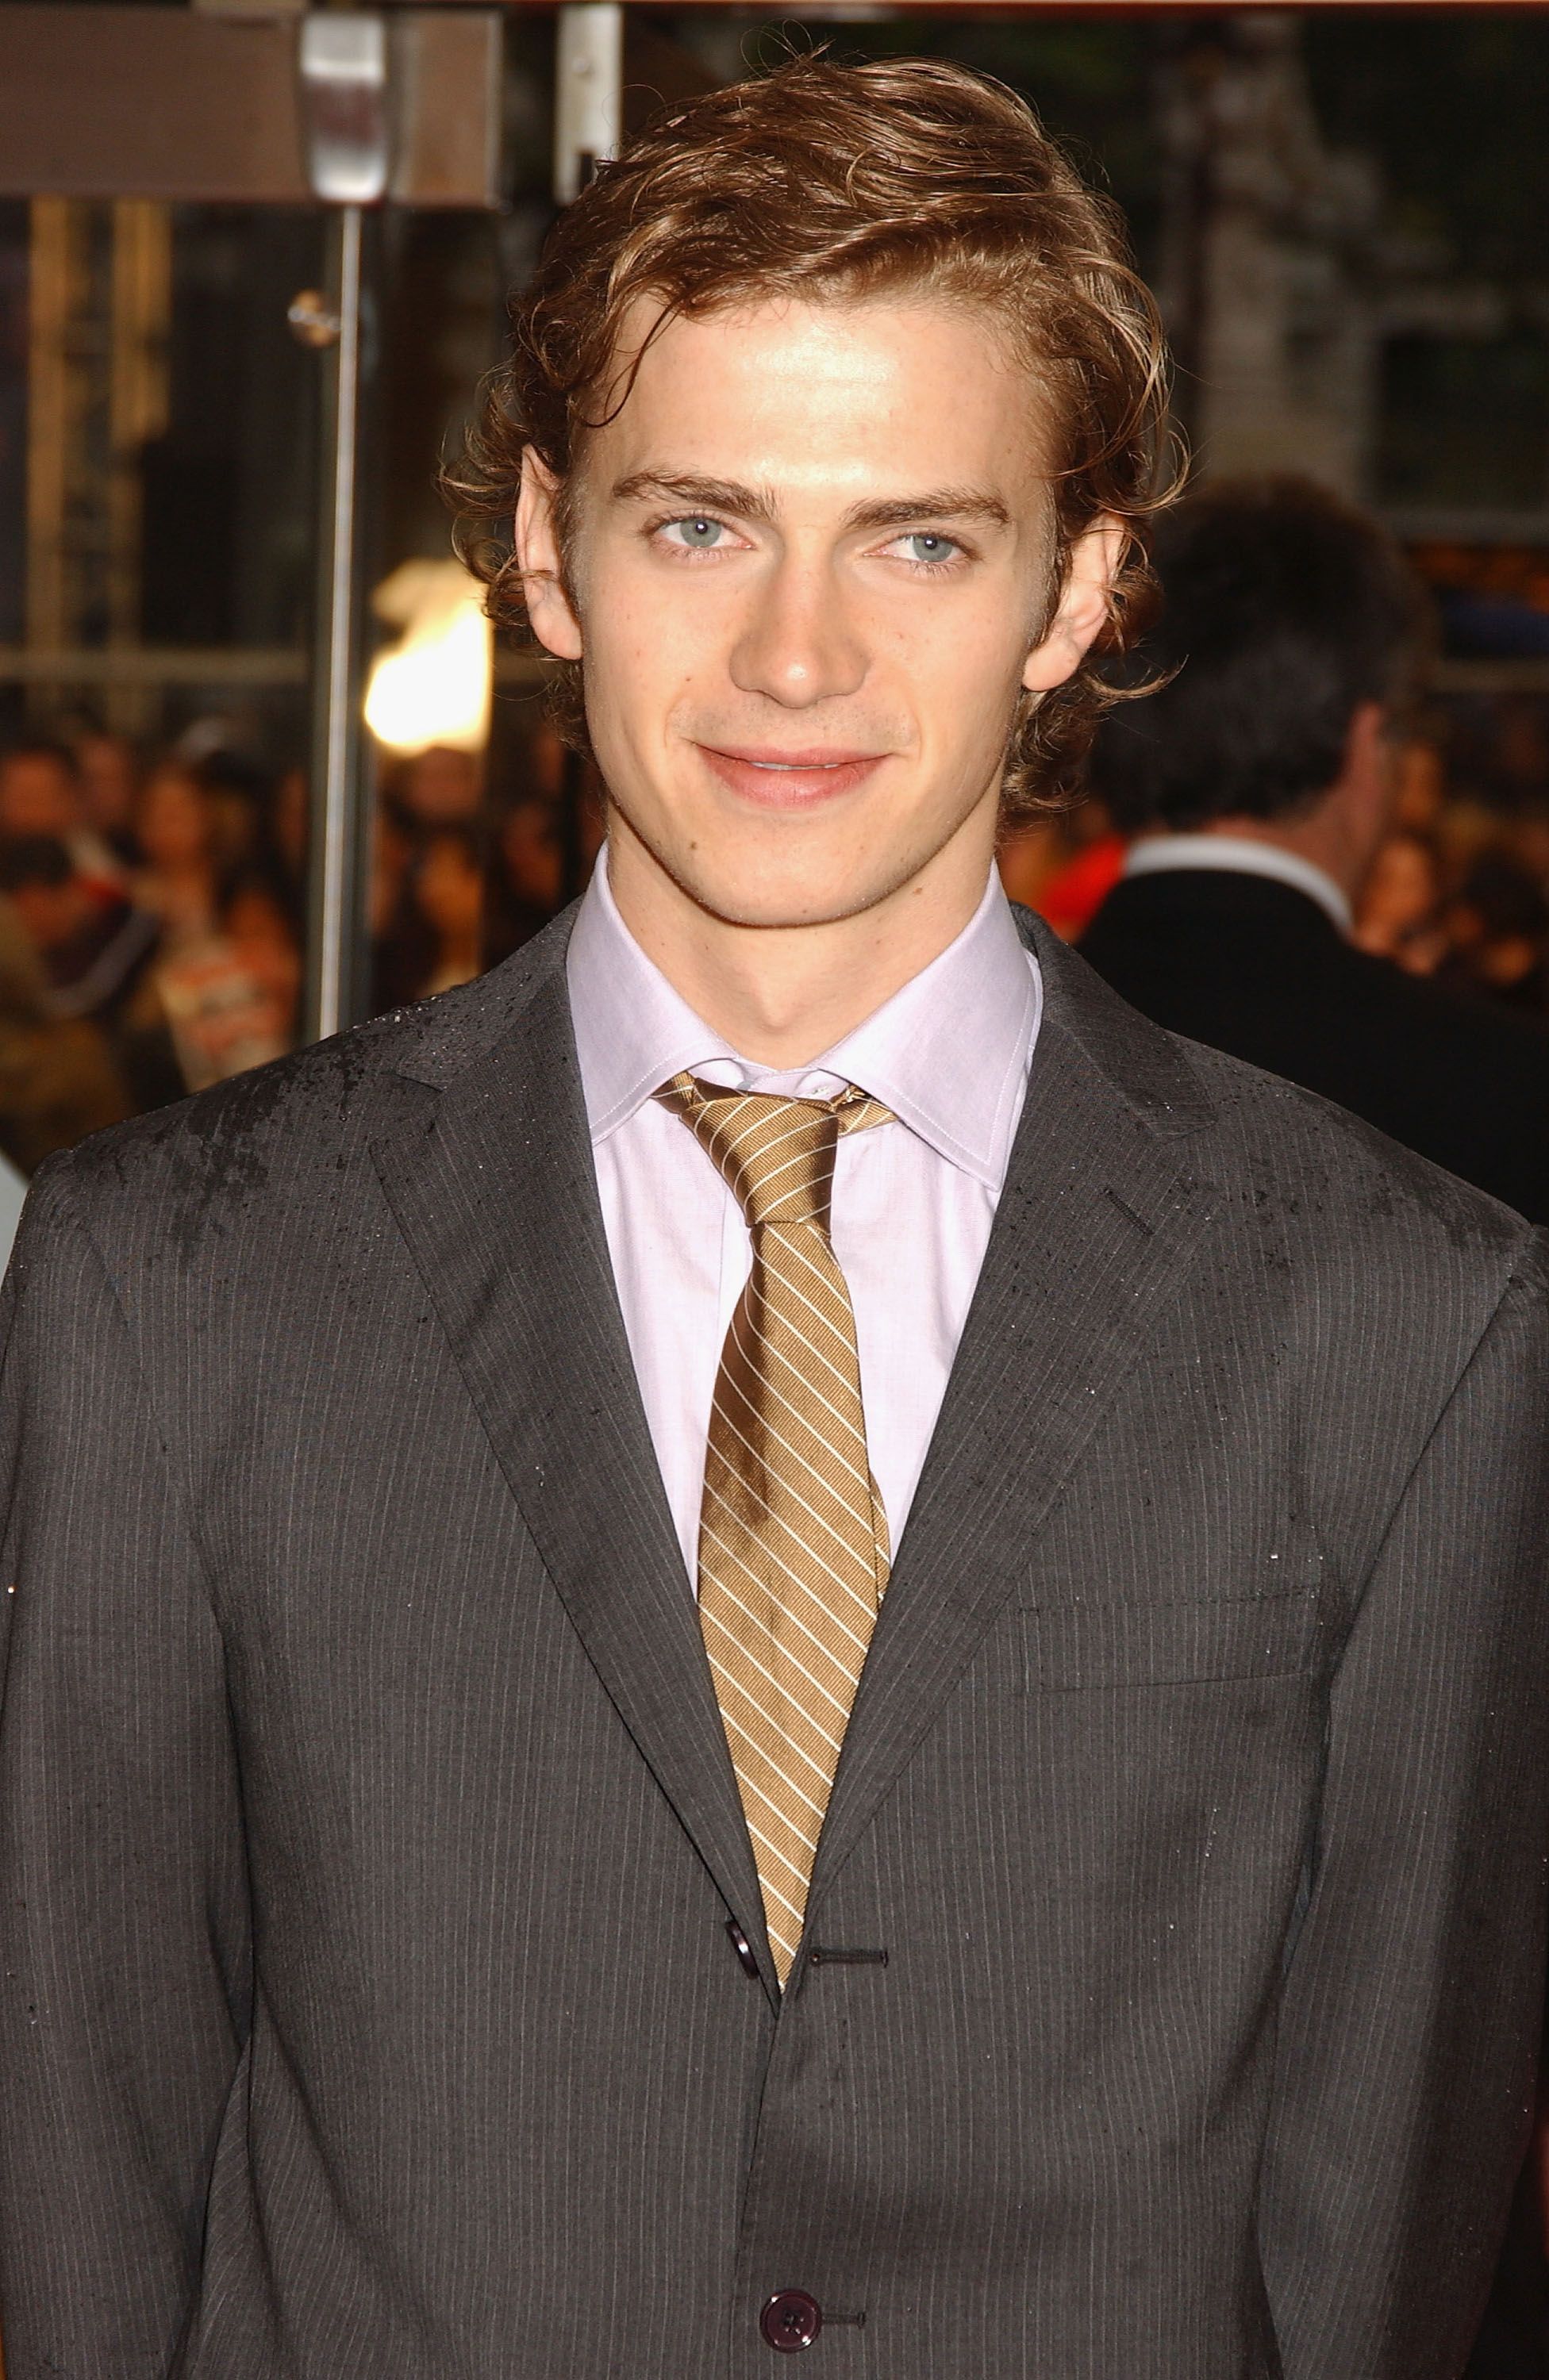 Hayden Christensen at the premiere of "Star Wars Episode III: Revenge Of The Sith" in 2005 in London | Source: Getty Images